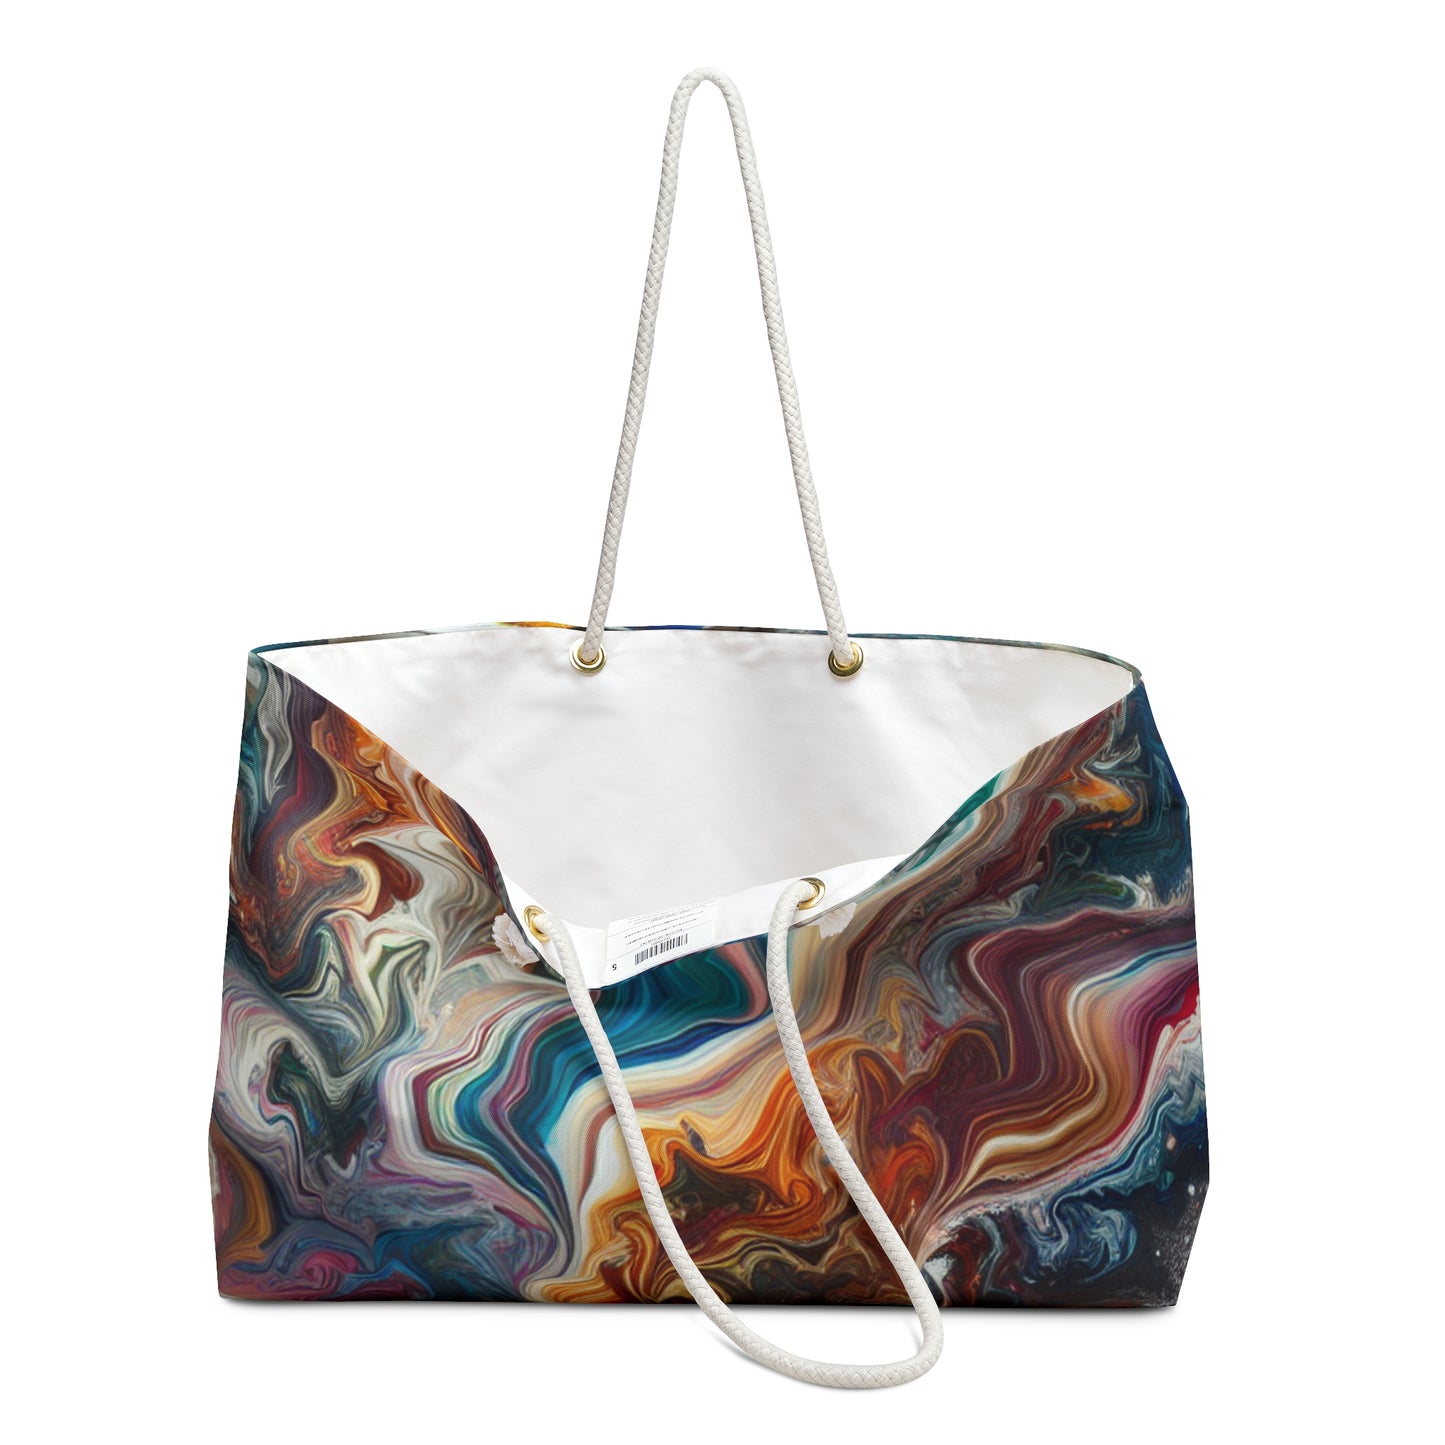 "A Paint Poured Paradise: Acrylic Pouring Art" - The Alien Weekender Bag Acrylic Pouring Style